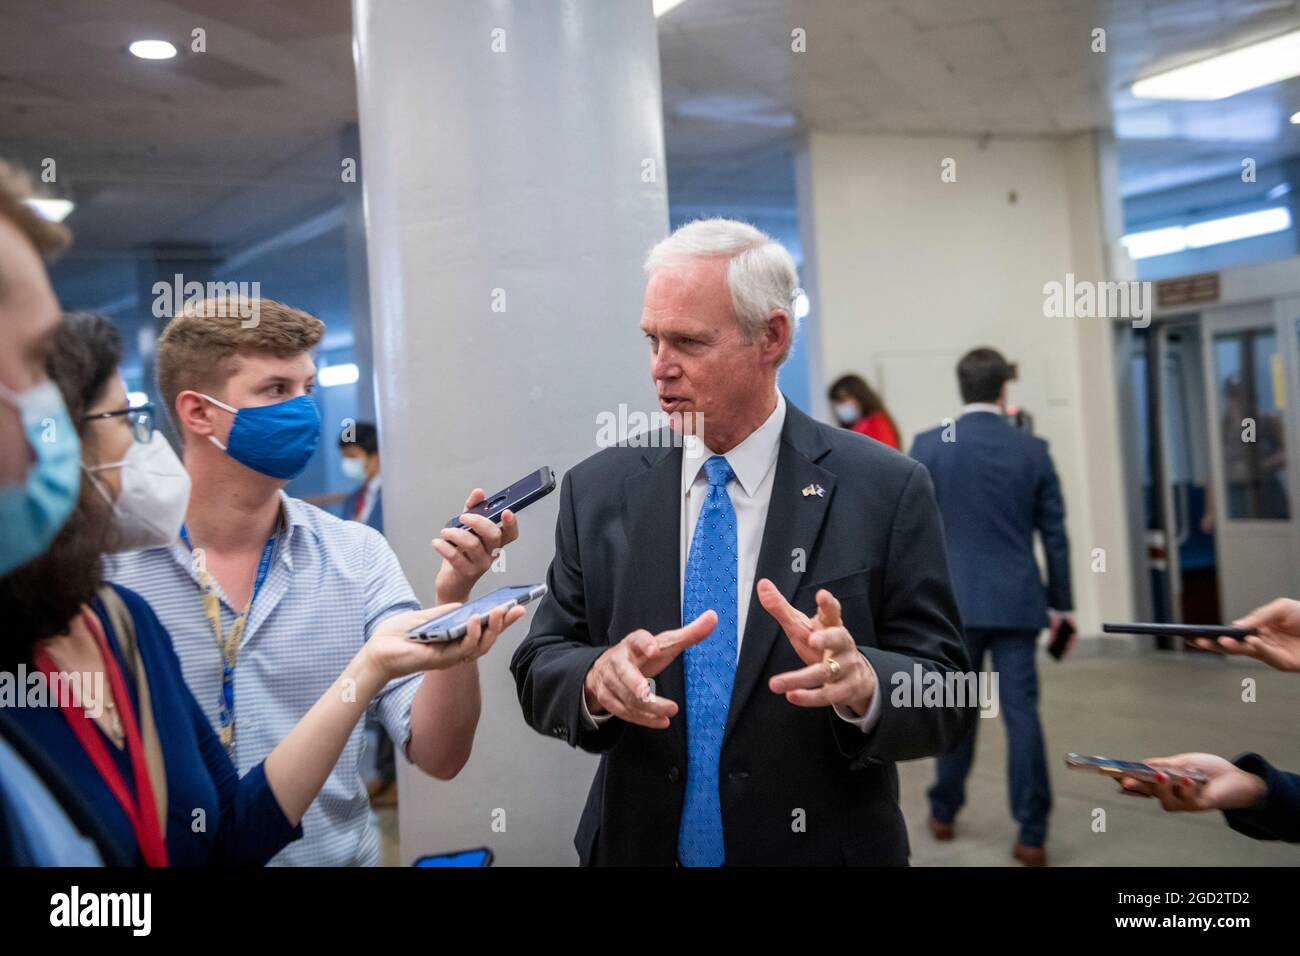 Washington, United States Of America. 10th Aug, 2021. United States Senator Ron Johnson (Republican of Wisconsin) talks with reporters as he walks through the Senate subway during a vote at the US Capitol in Washington, DC, Tuesday, August 10, 2021. The Senate is expected to vote today on final passage of the bipartisan $1 trillion H.R. 3684, Infrastructure Investment and Jobs Act. the Credit: Rod Lamkey/CNP/Sipa USA Credit: Sipa USA/Alamy Live News Stock Photo